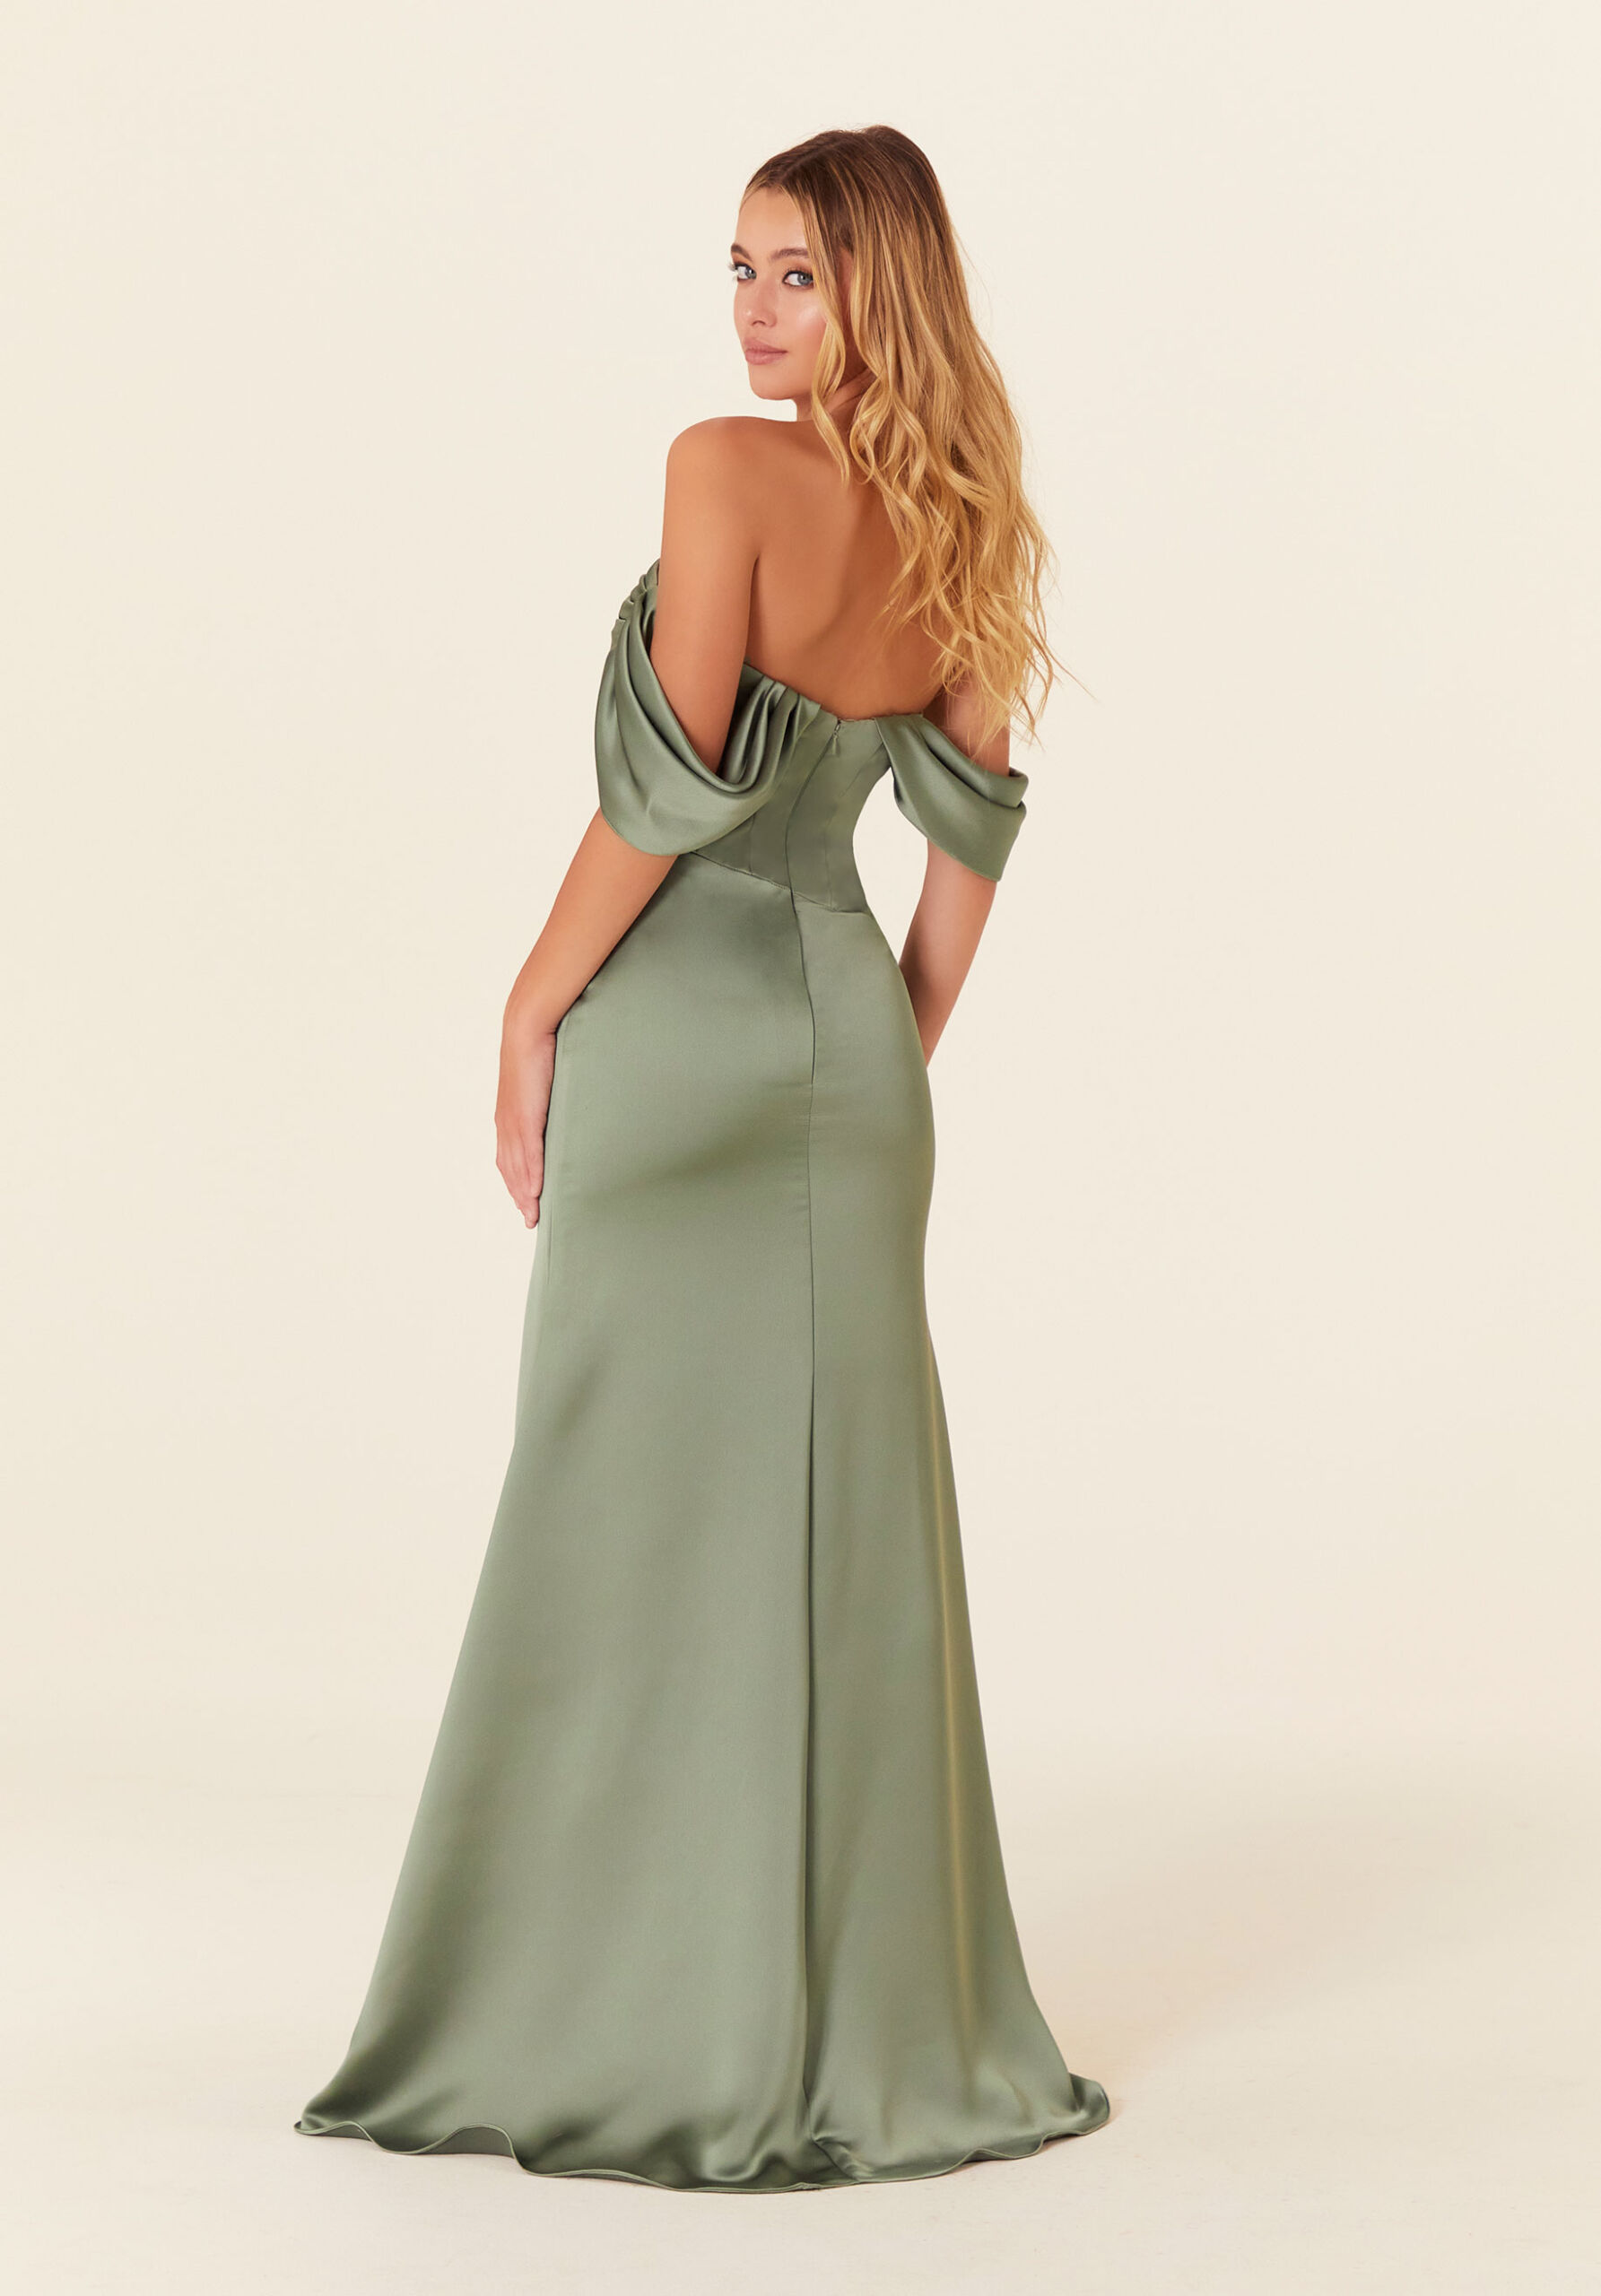 Green Off Shoulder Long Mermaid Bridesmaid Dresses With Side Slit  Sweetheart Neck Wedding Party Dress For